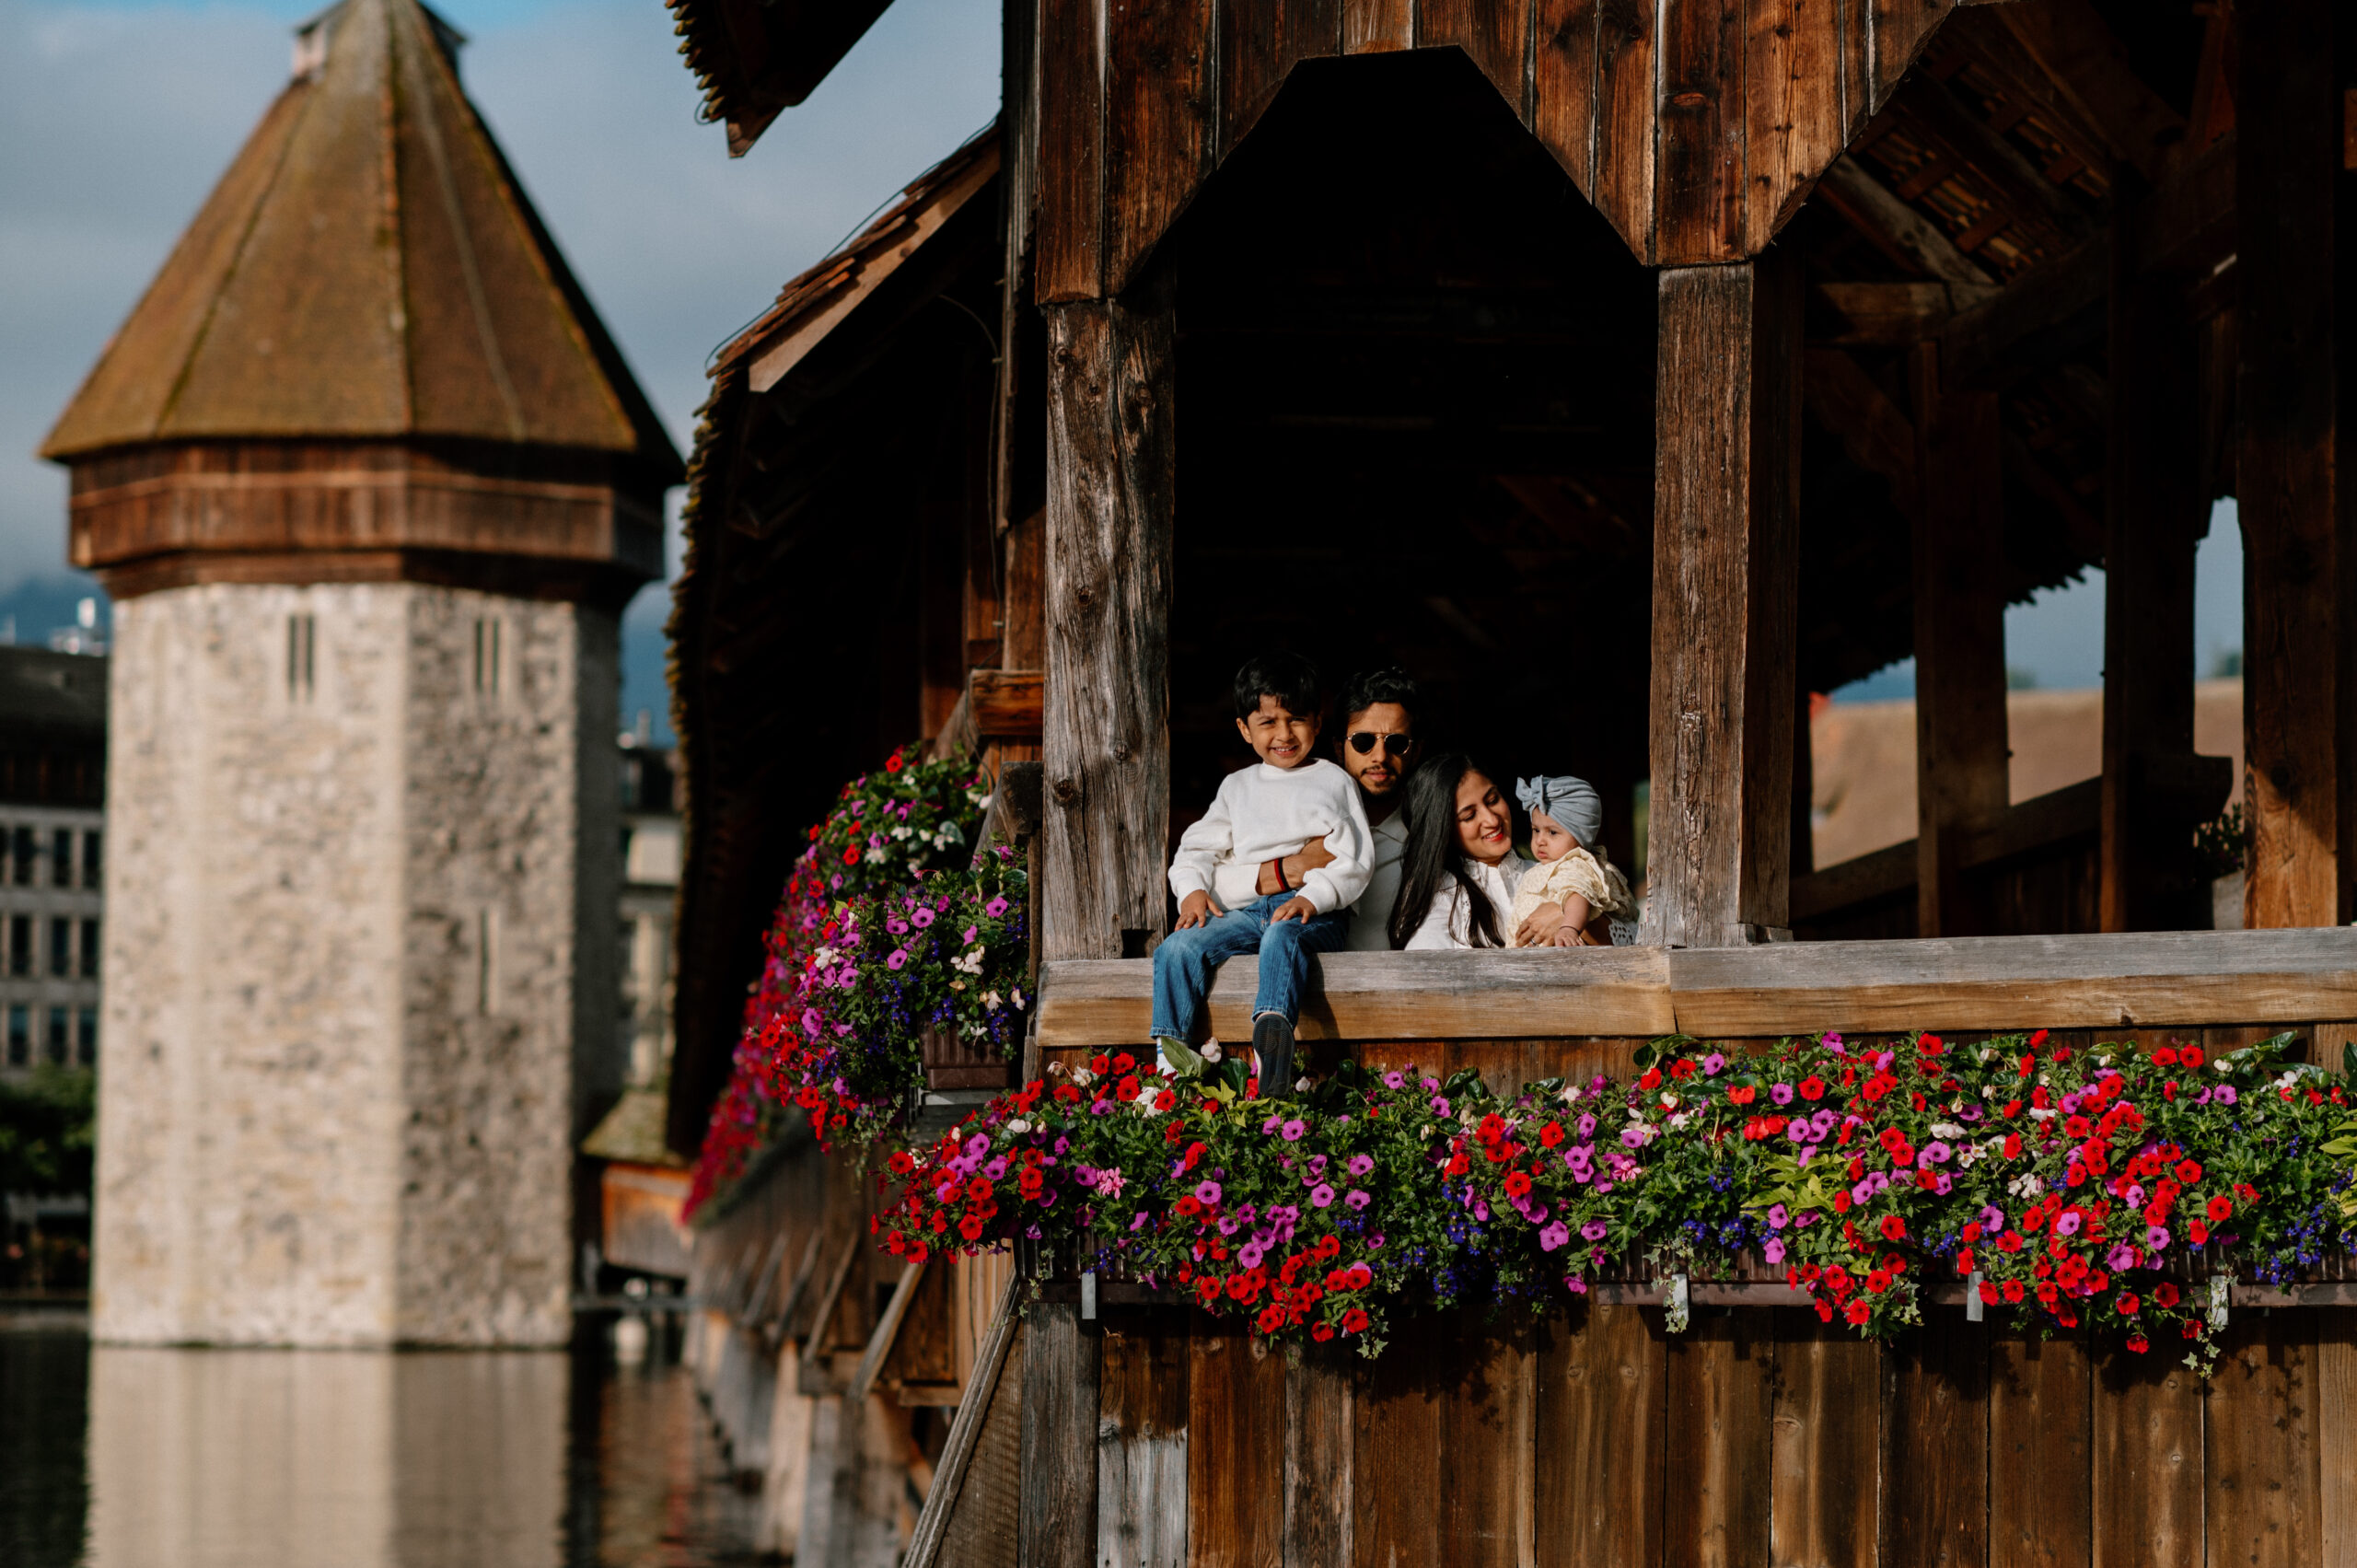 Family enjoying a morning photo session on Chapel Bridge in Luzern, Switzerland, with vibrant flowers in the foreground.